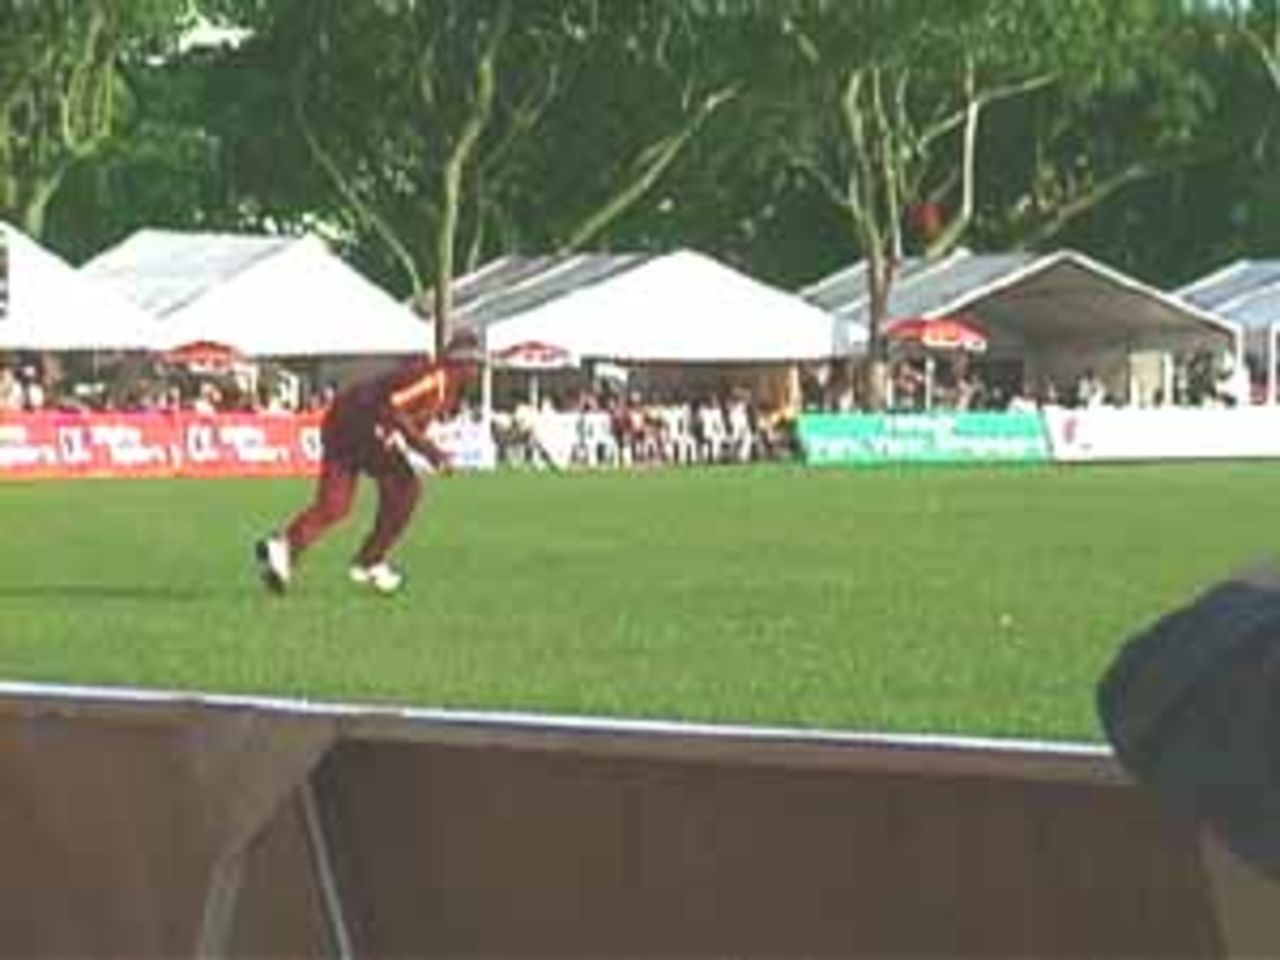 West Indian fielder covering the boundary, India v West Indies (3rd ODI), Coca-Cola Singapore Challenge, 1999-2000, Kallang Ground, Singapore, 5 Sep 1999.